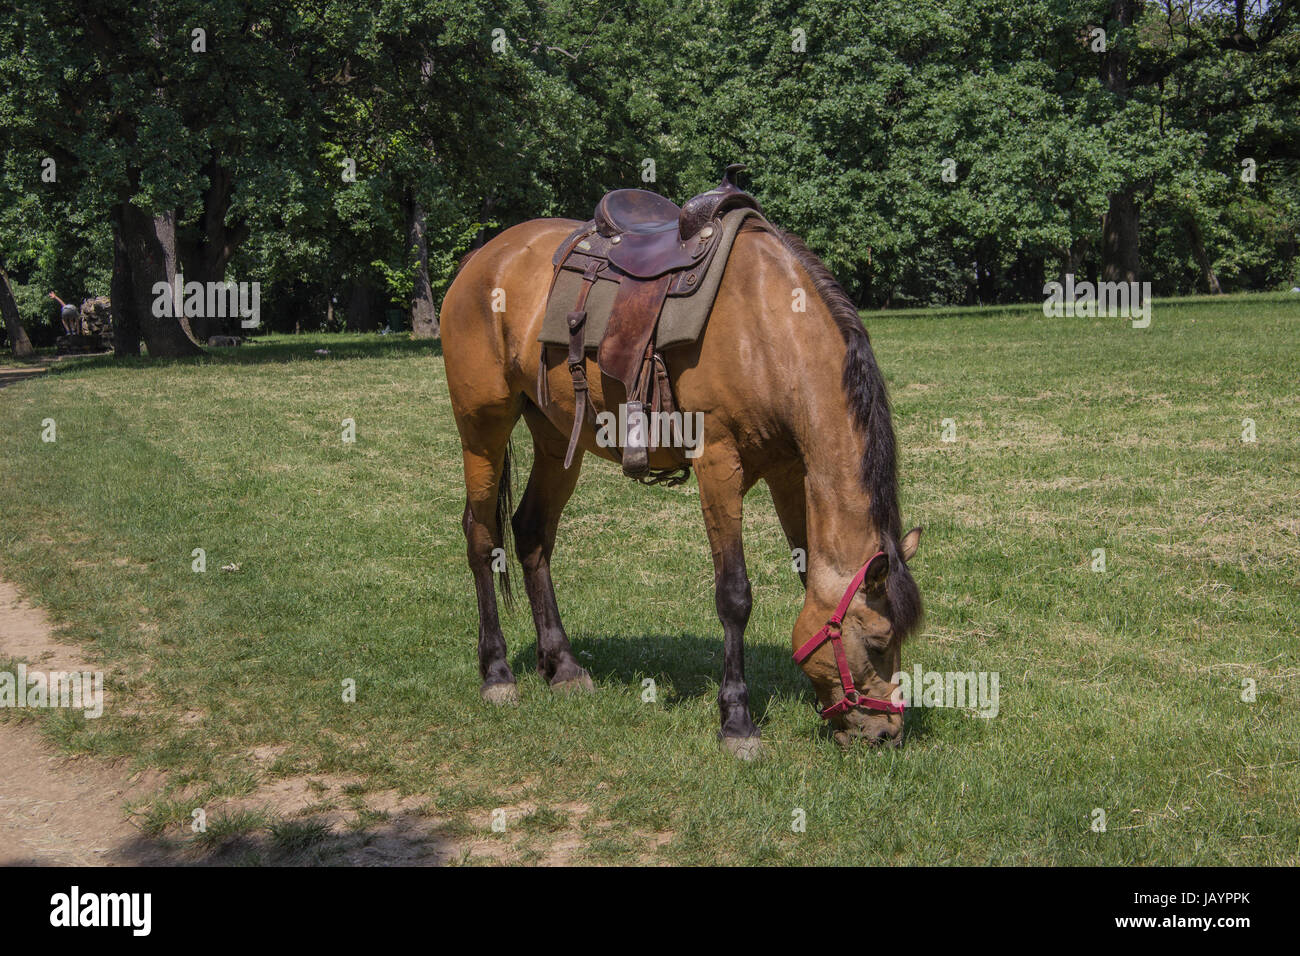 Stock Photography - Horse Eating Grass Stock Photo